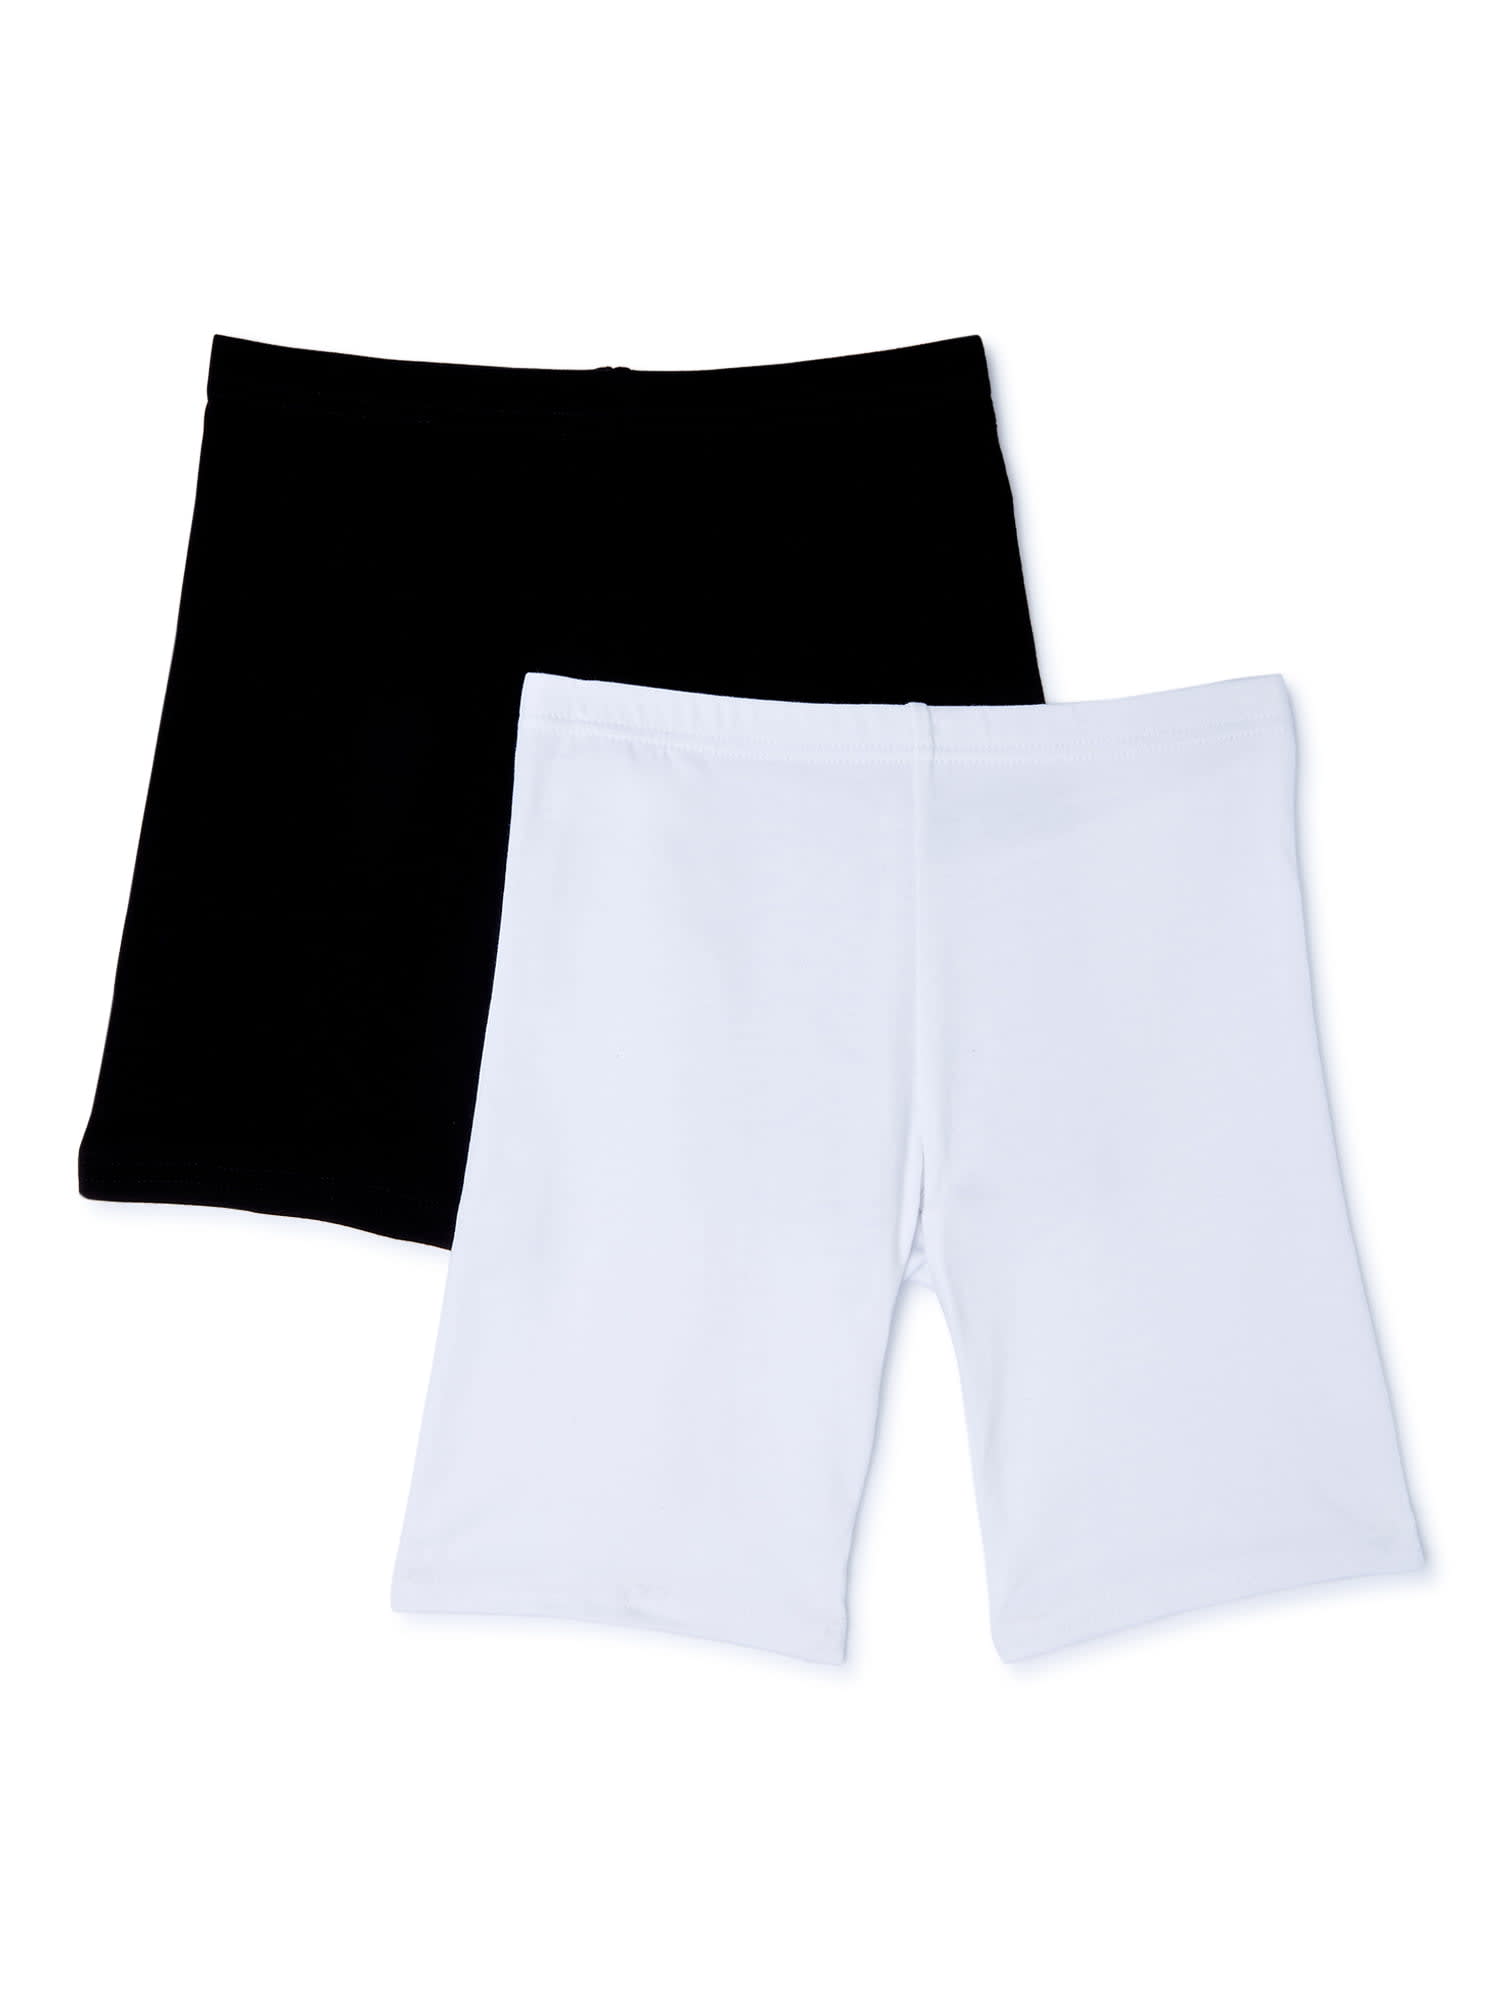 Athletic Works Girls' Active Boyshorts Underwear, 5 Pack, Sizes 4-16 -  DroneUp Delivery